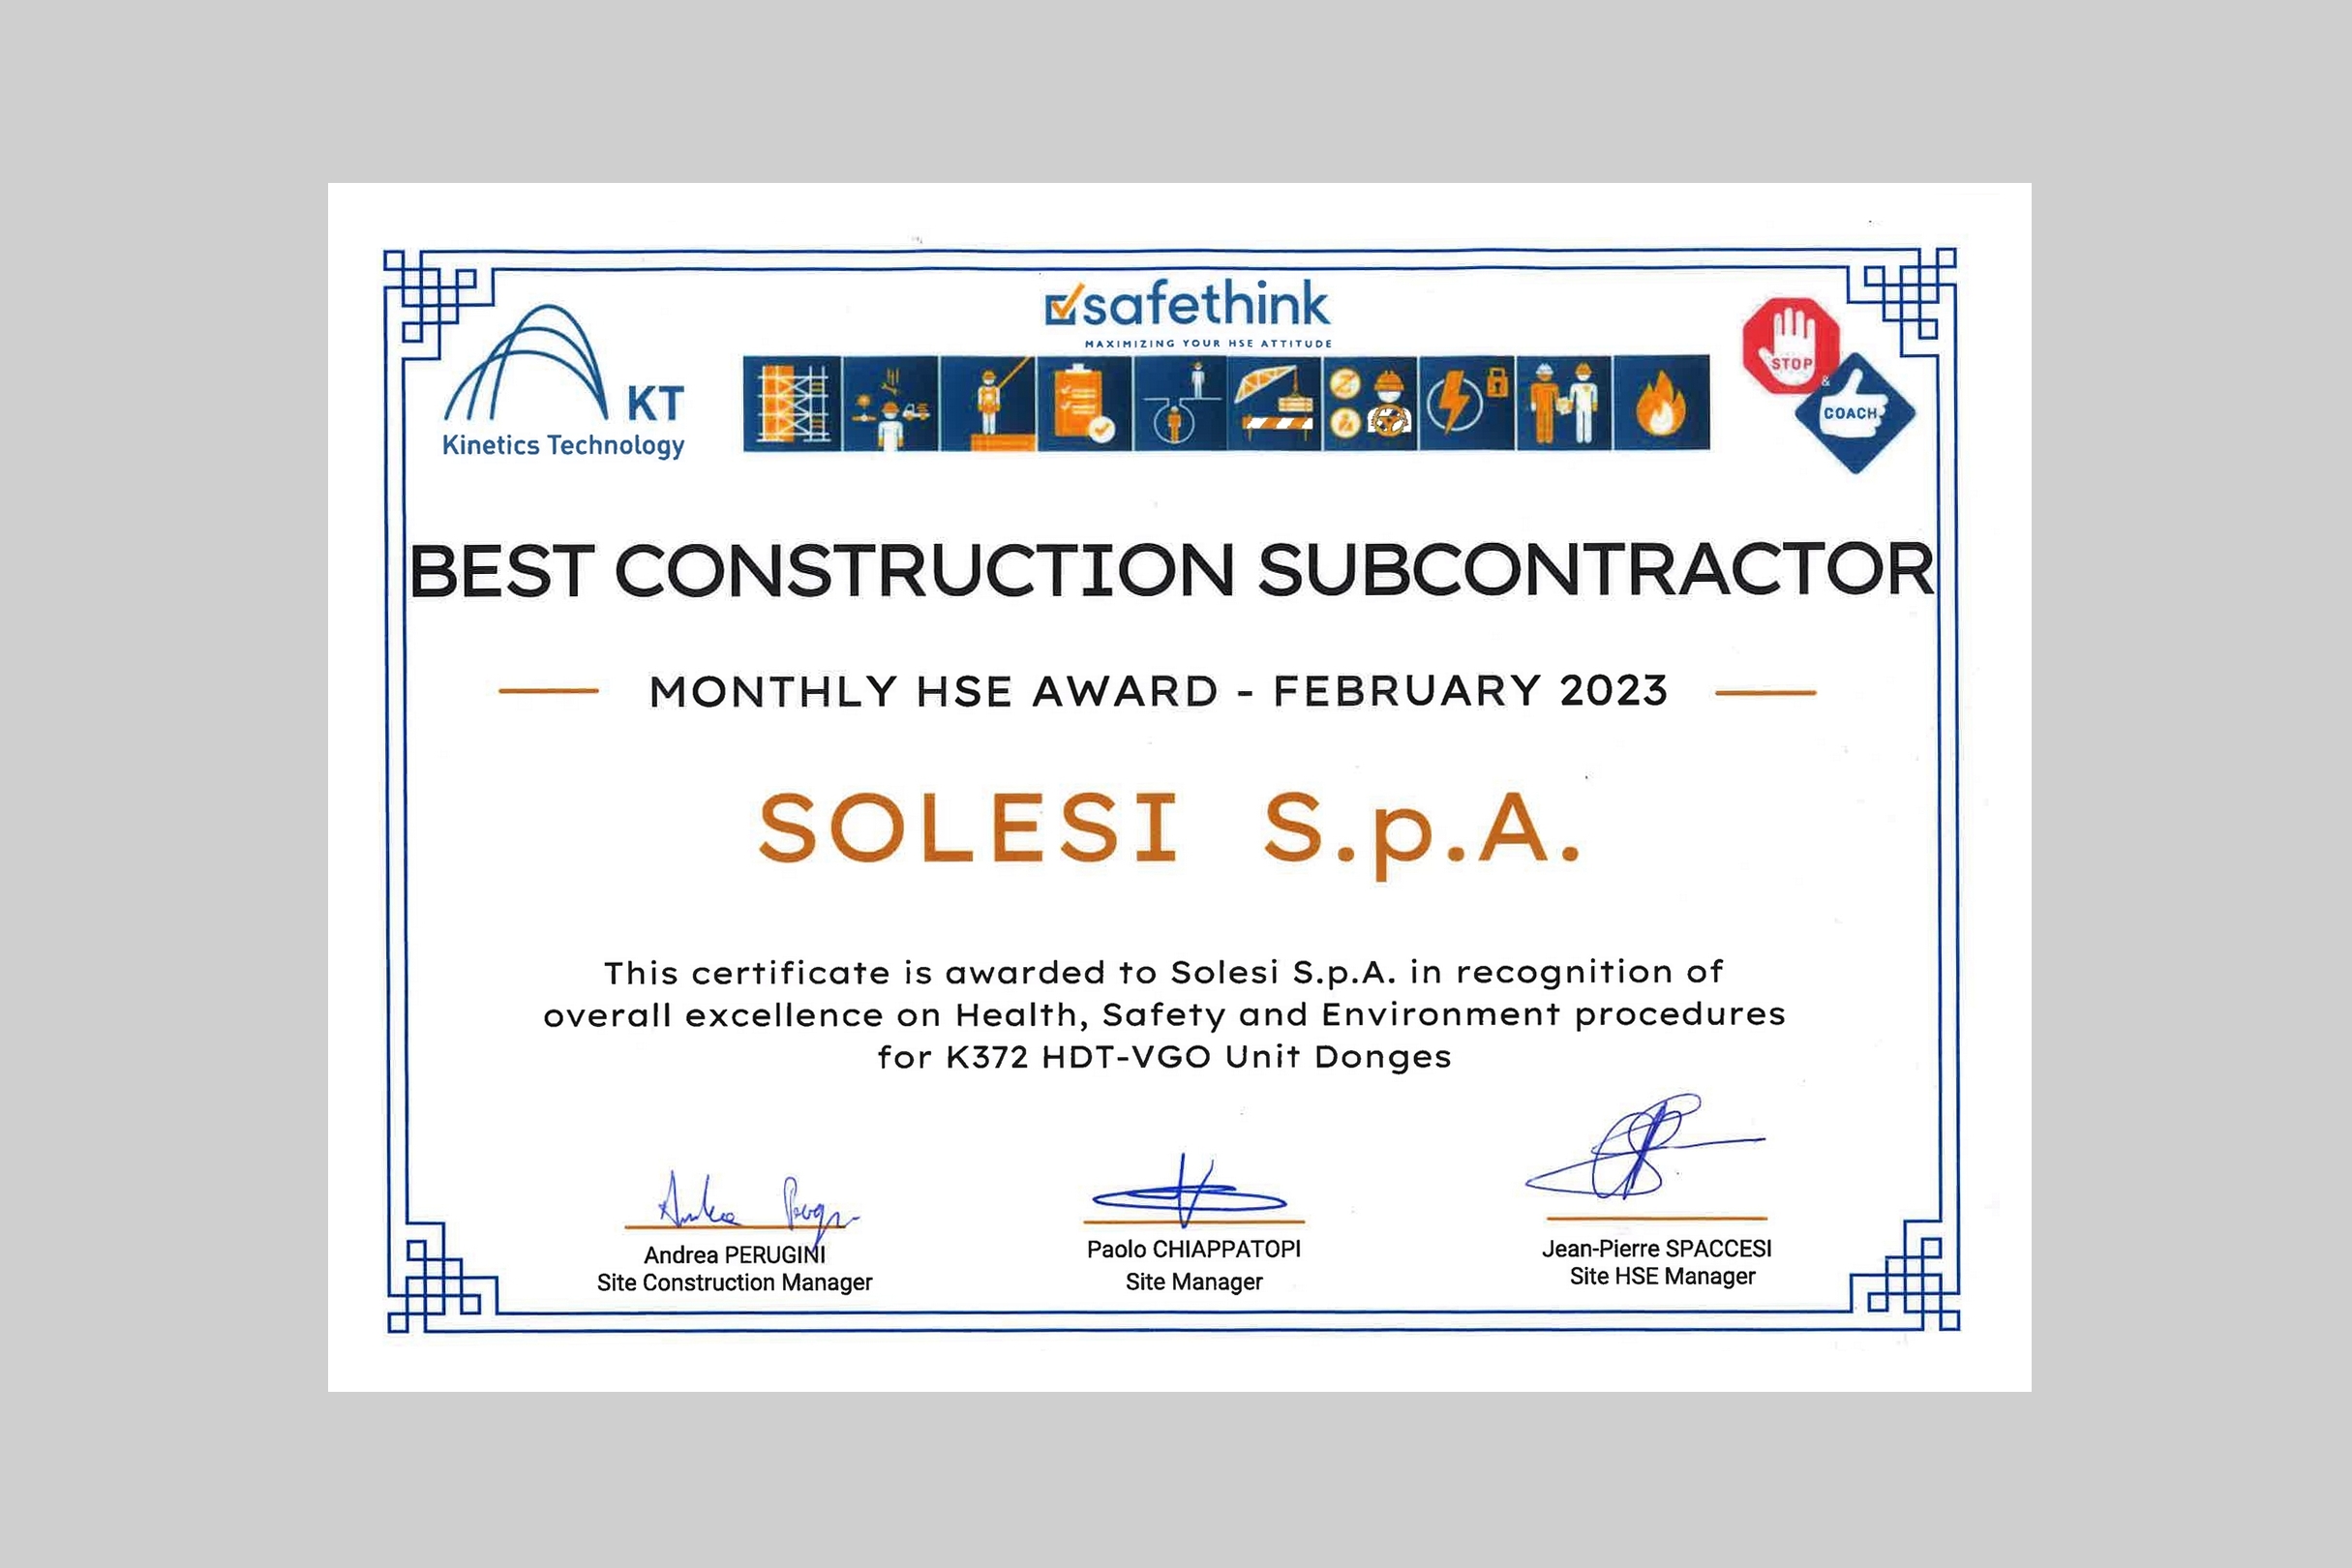 “BEST CONSTRUCTION SUBCONTRACTOR” FOR THE FIFTH TIME